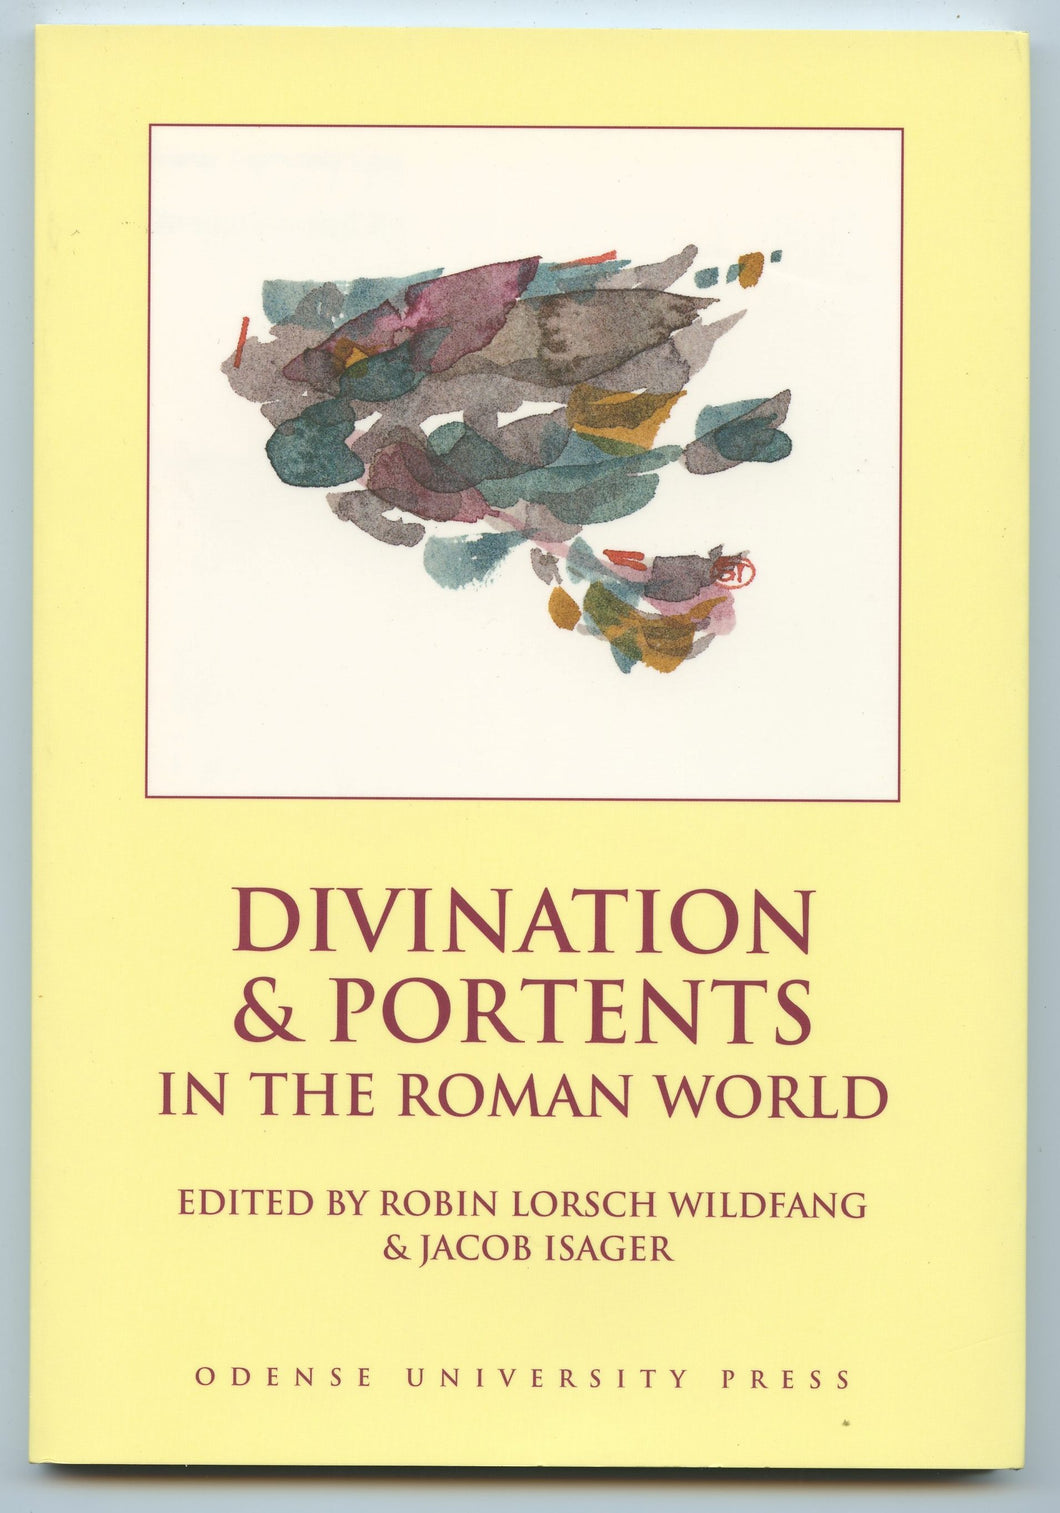 Divination & Portents in the Roman World